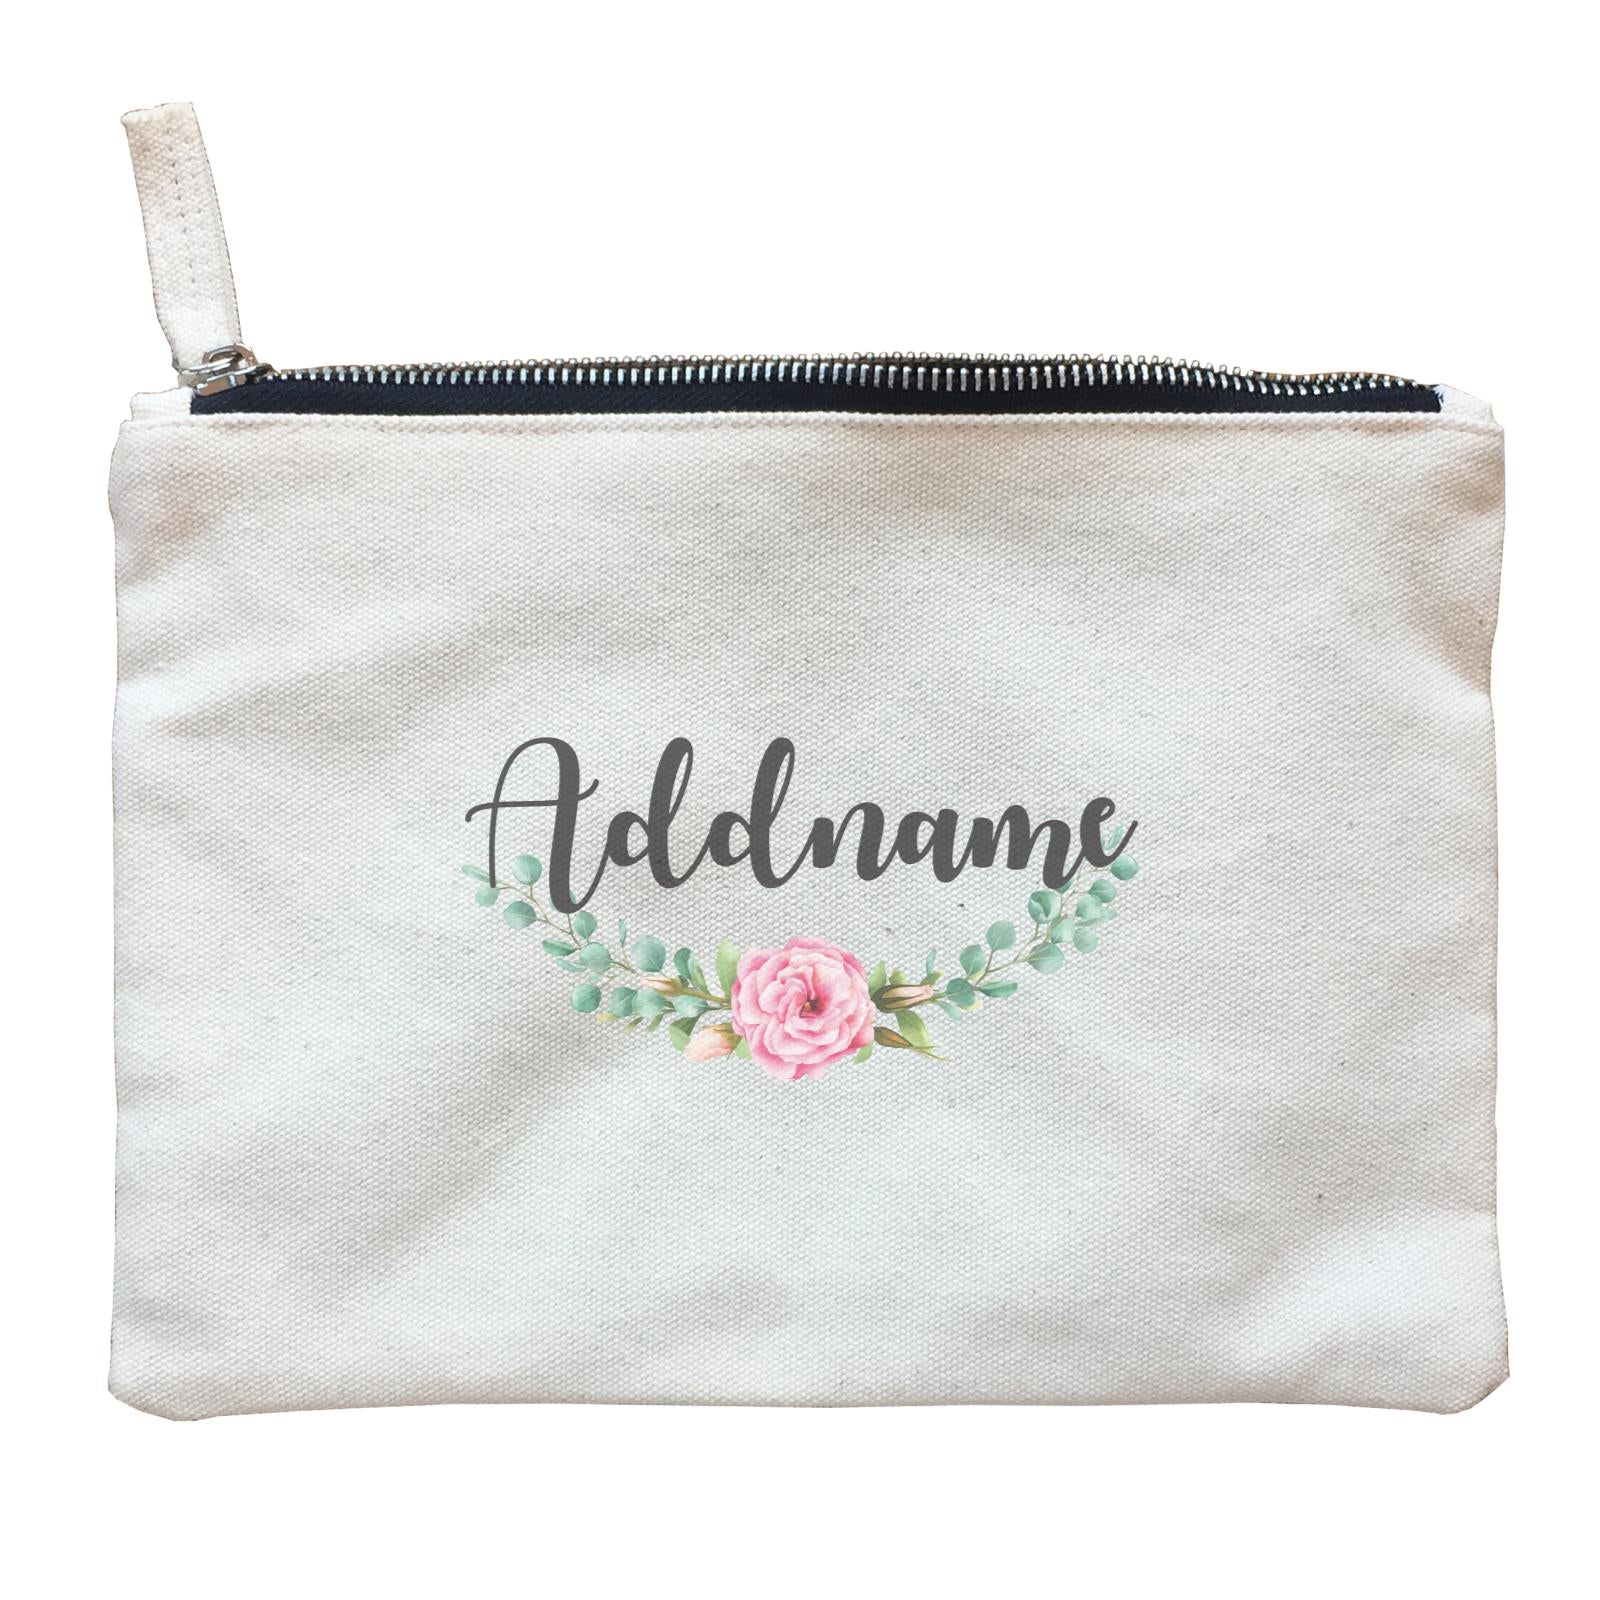 Bridesmaid Floral Modern Pink Flowers Addname Accessories Zipper Pouch